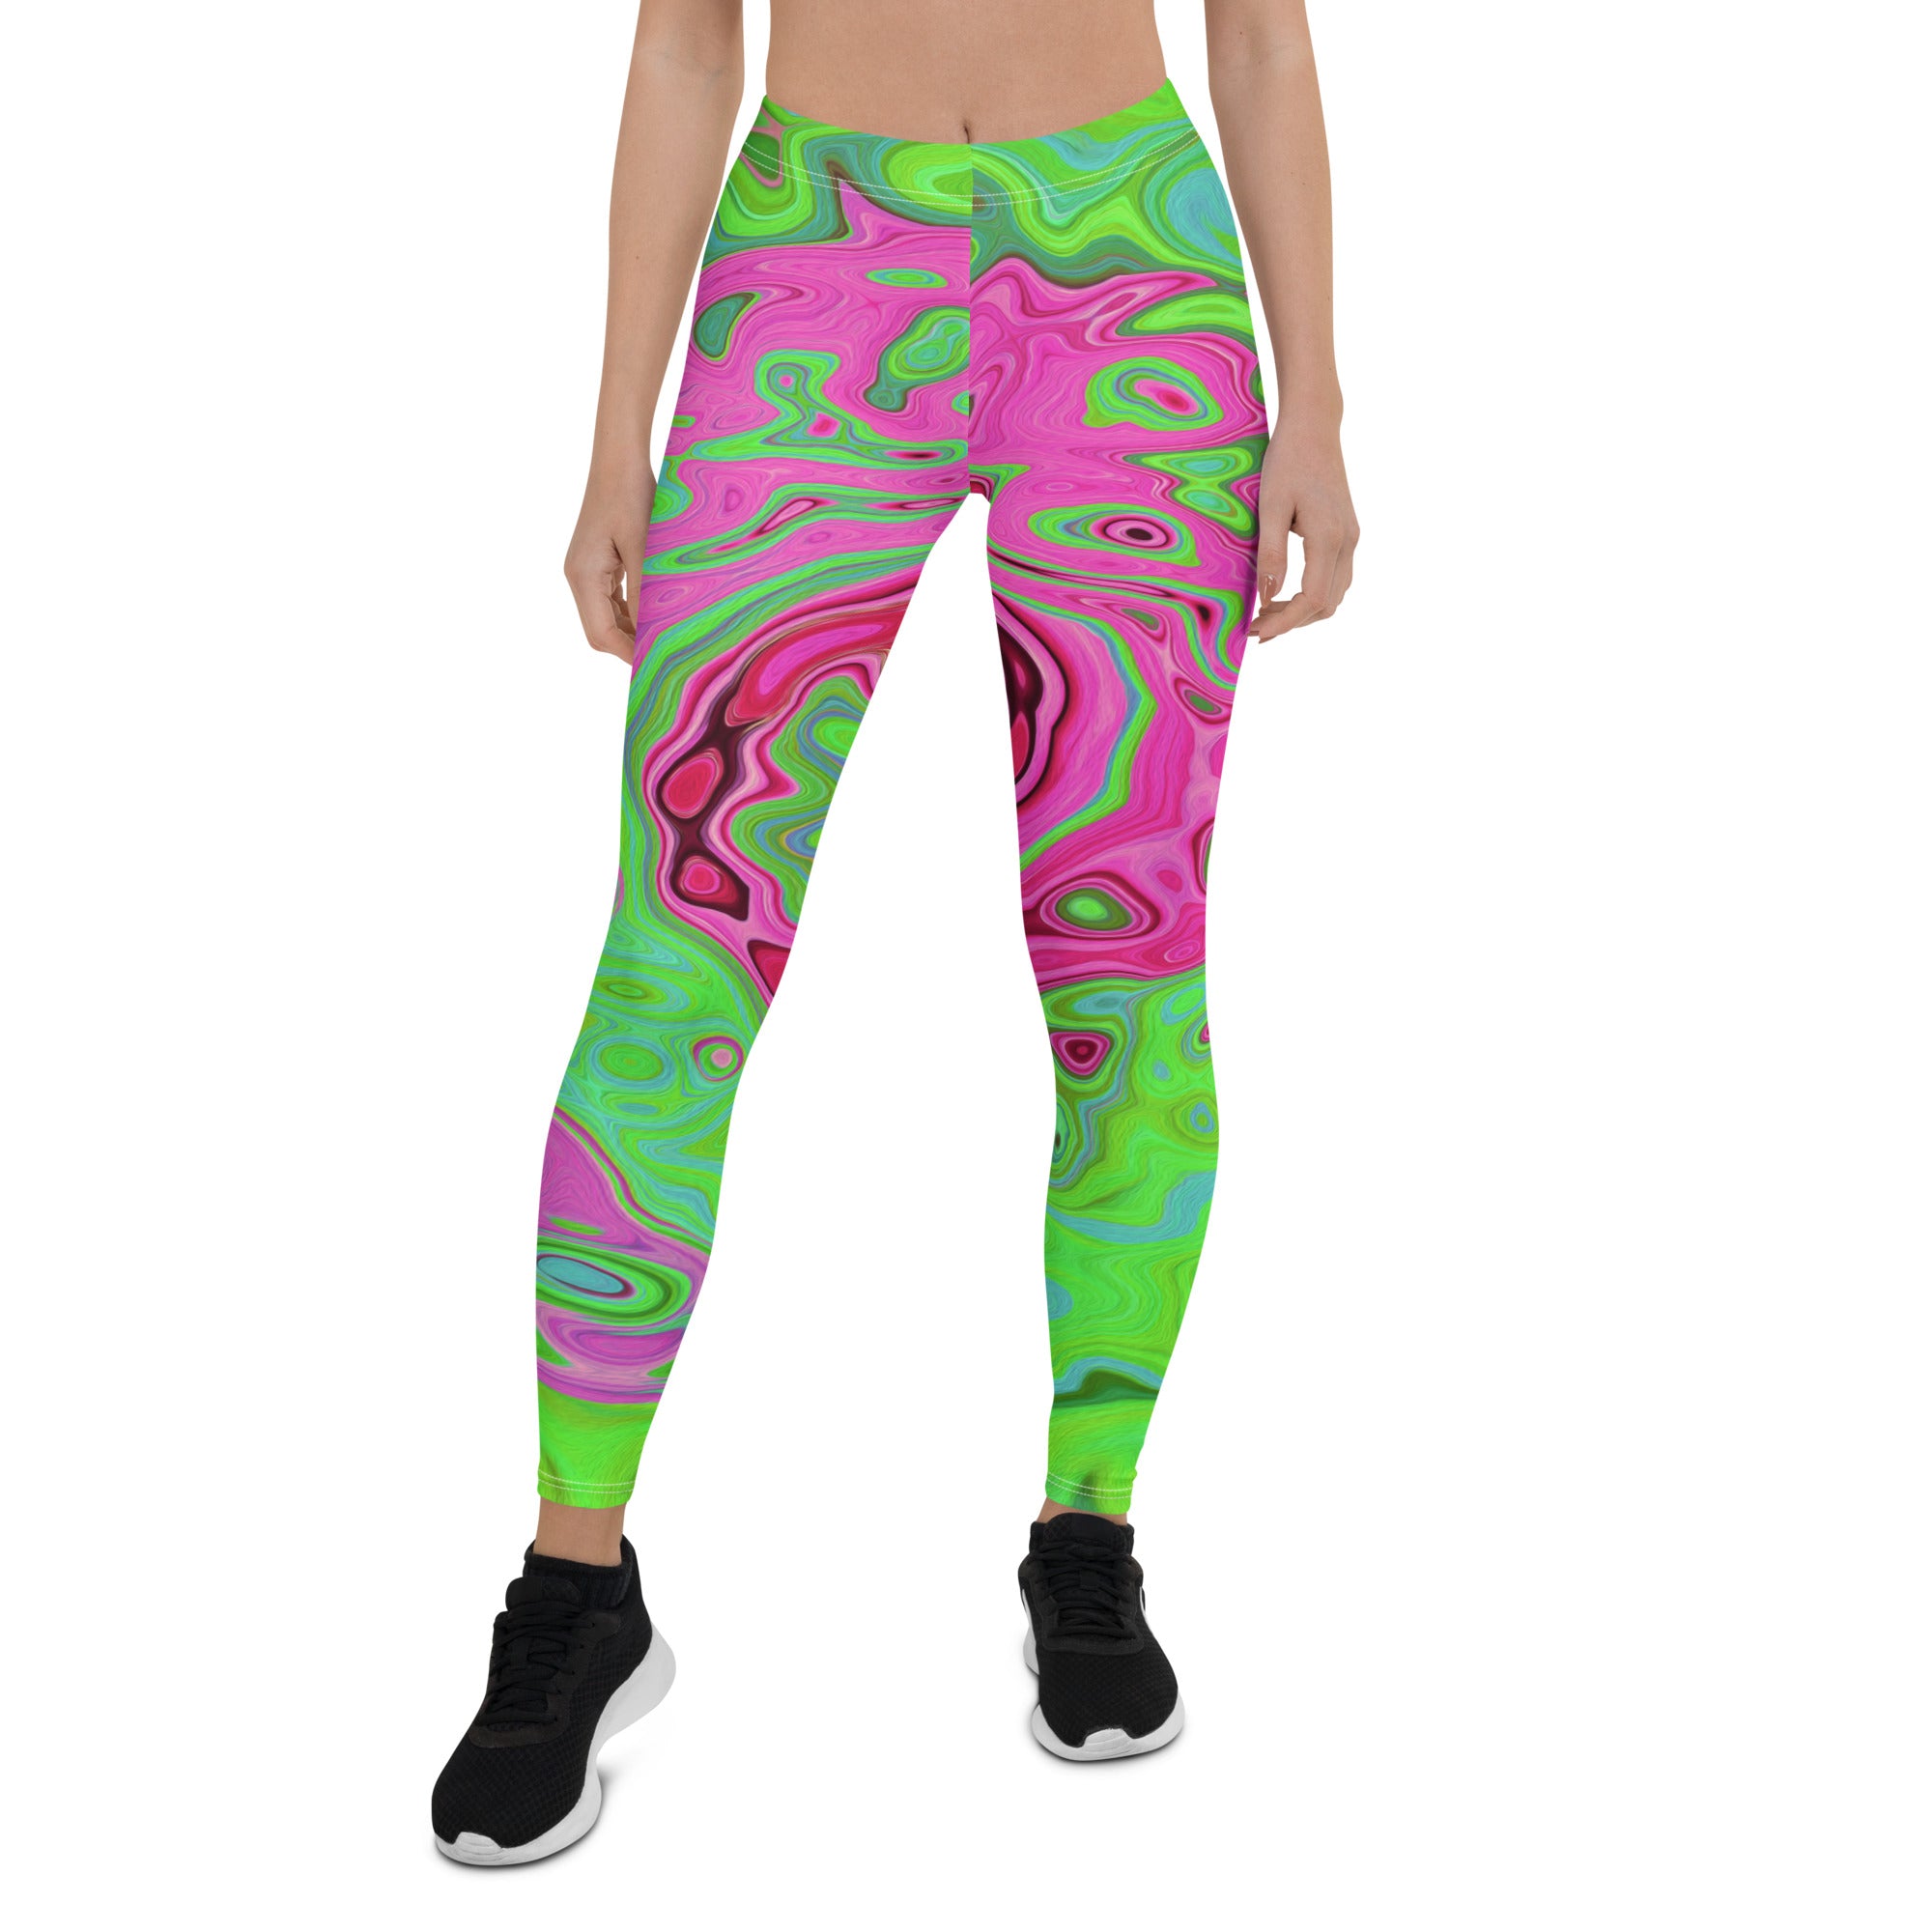 Leggings for Women - Groovy Abstract Green and Red Lava Liquid Swirl